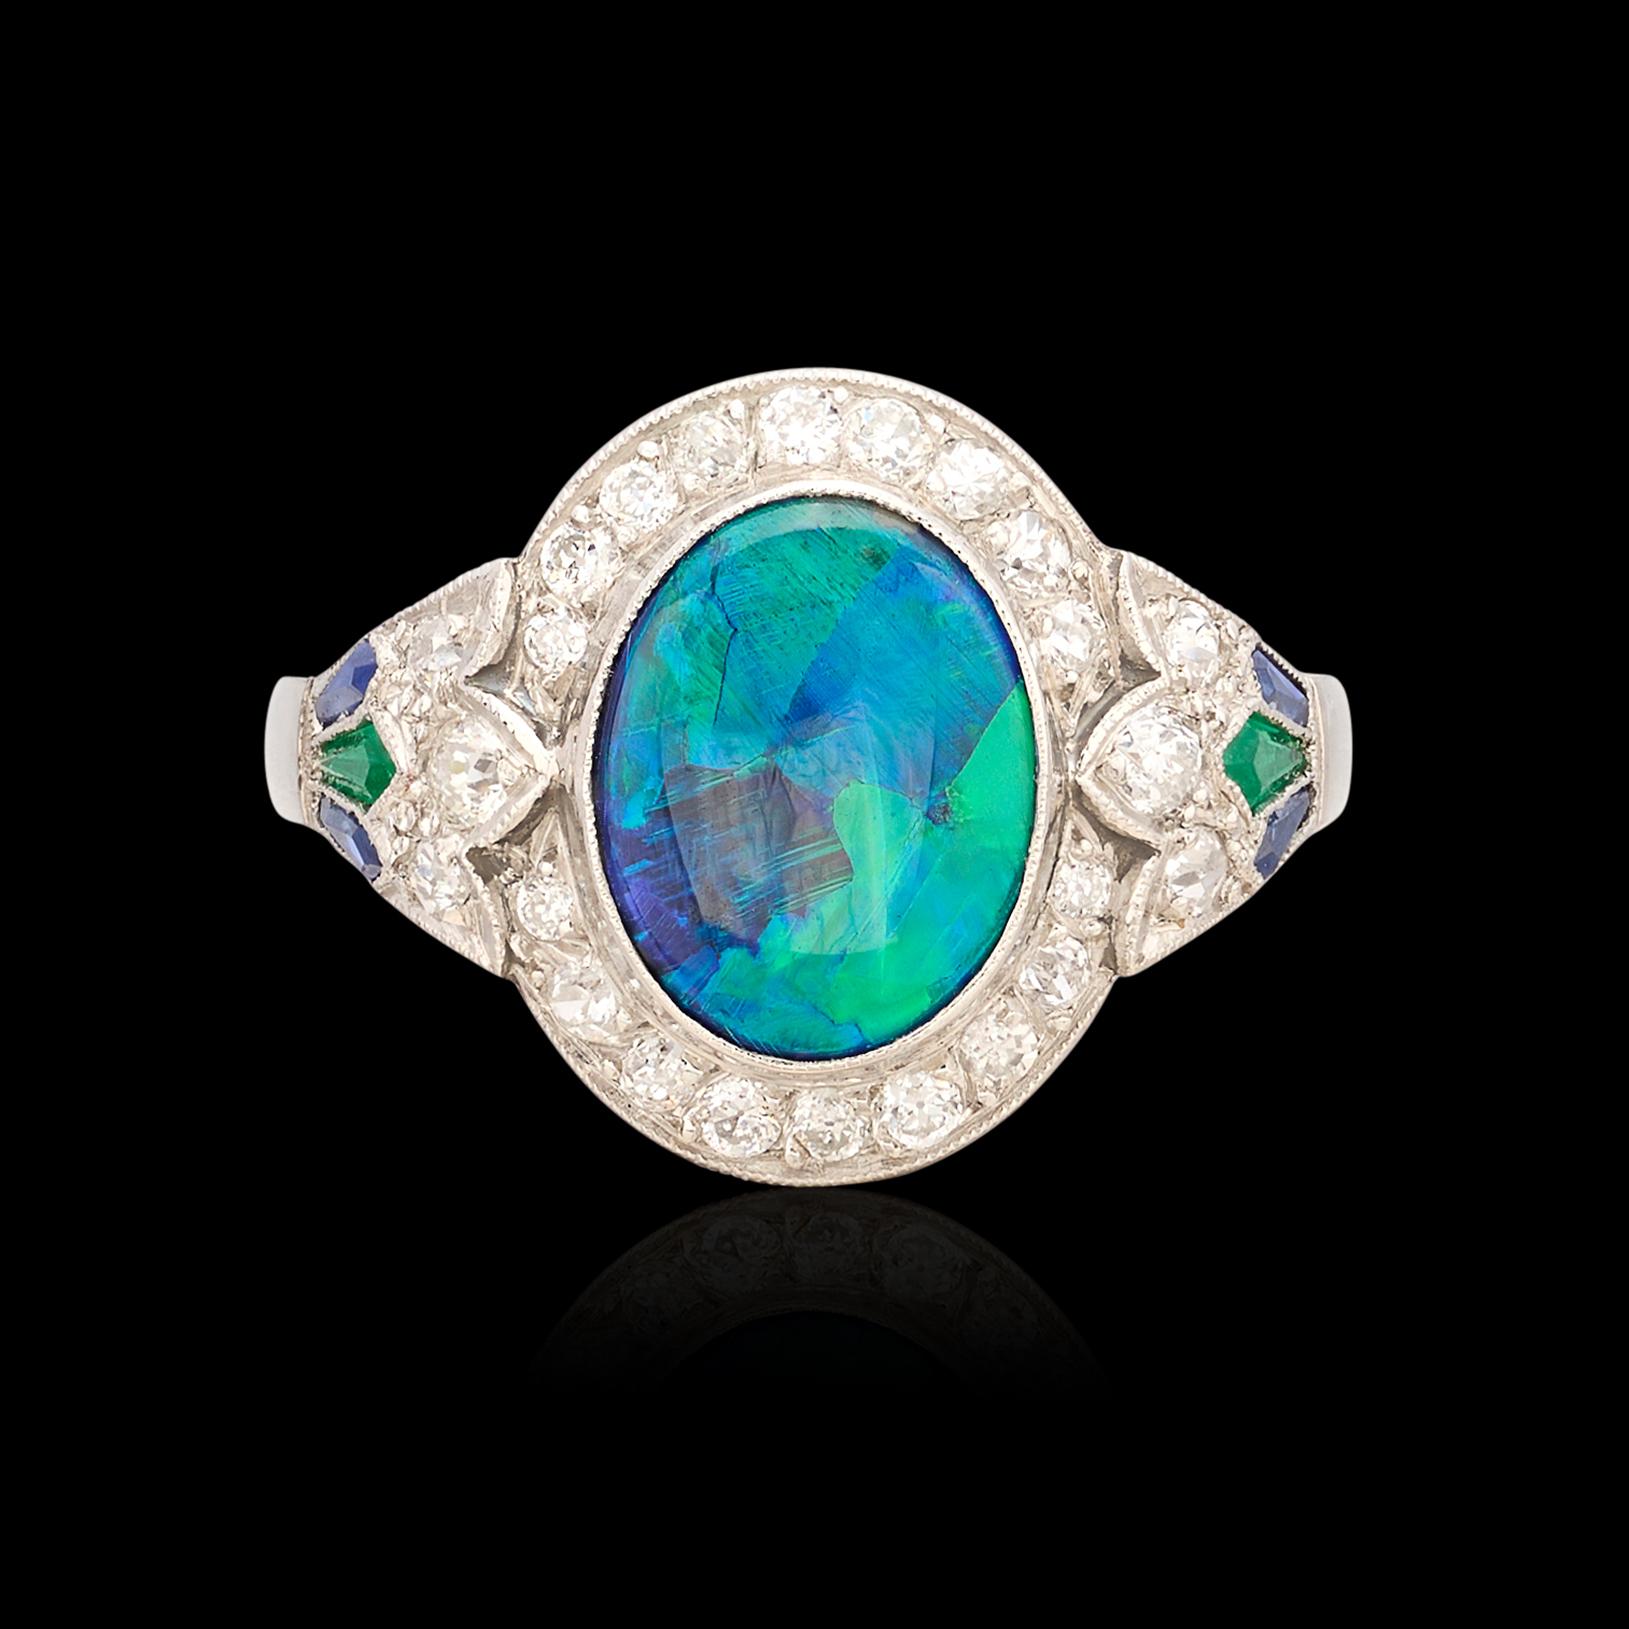 This Art Deco style ring brings the color! The platinum ring centers an oval-shaped black opal, with beautiful deep plays of blue and green, weighing 1.93 carats and measuring 10.0 x 8.0mm, framed with European and old single-cut diamonds weighing